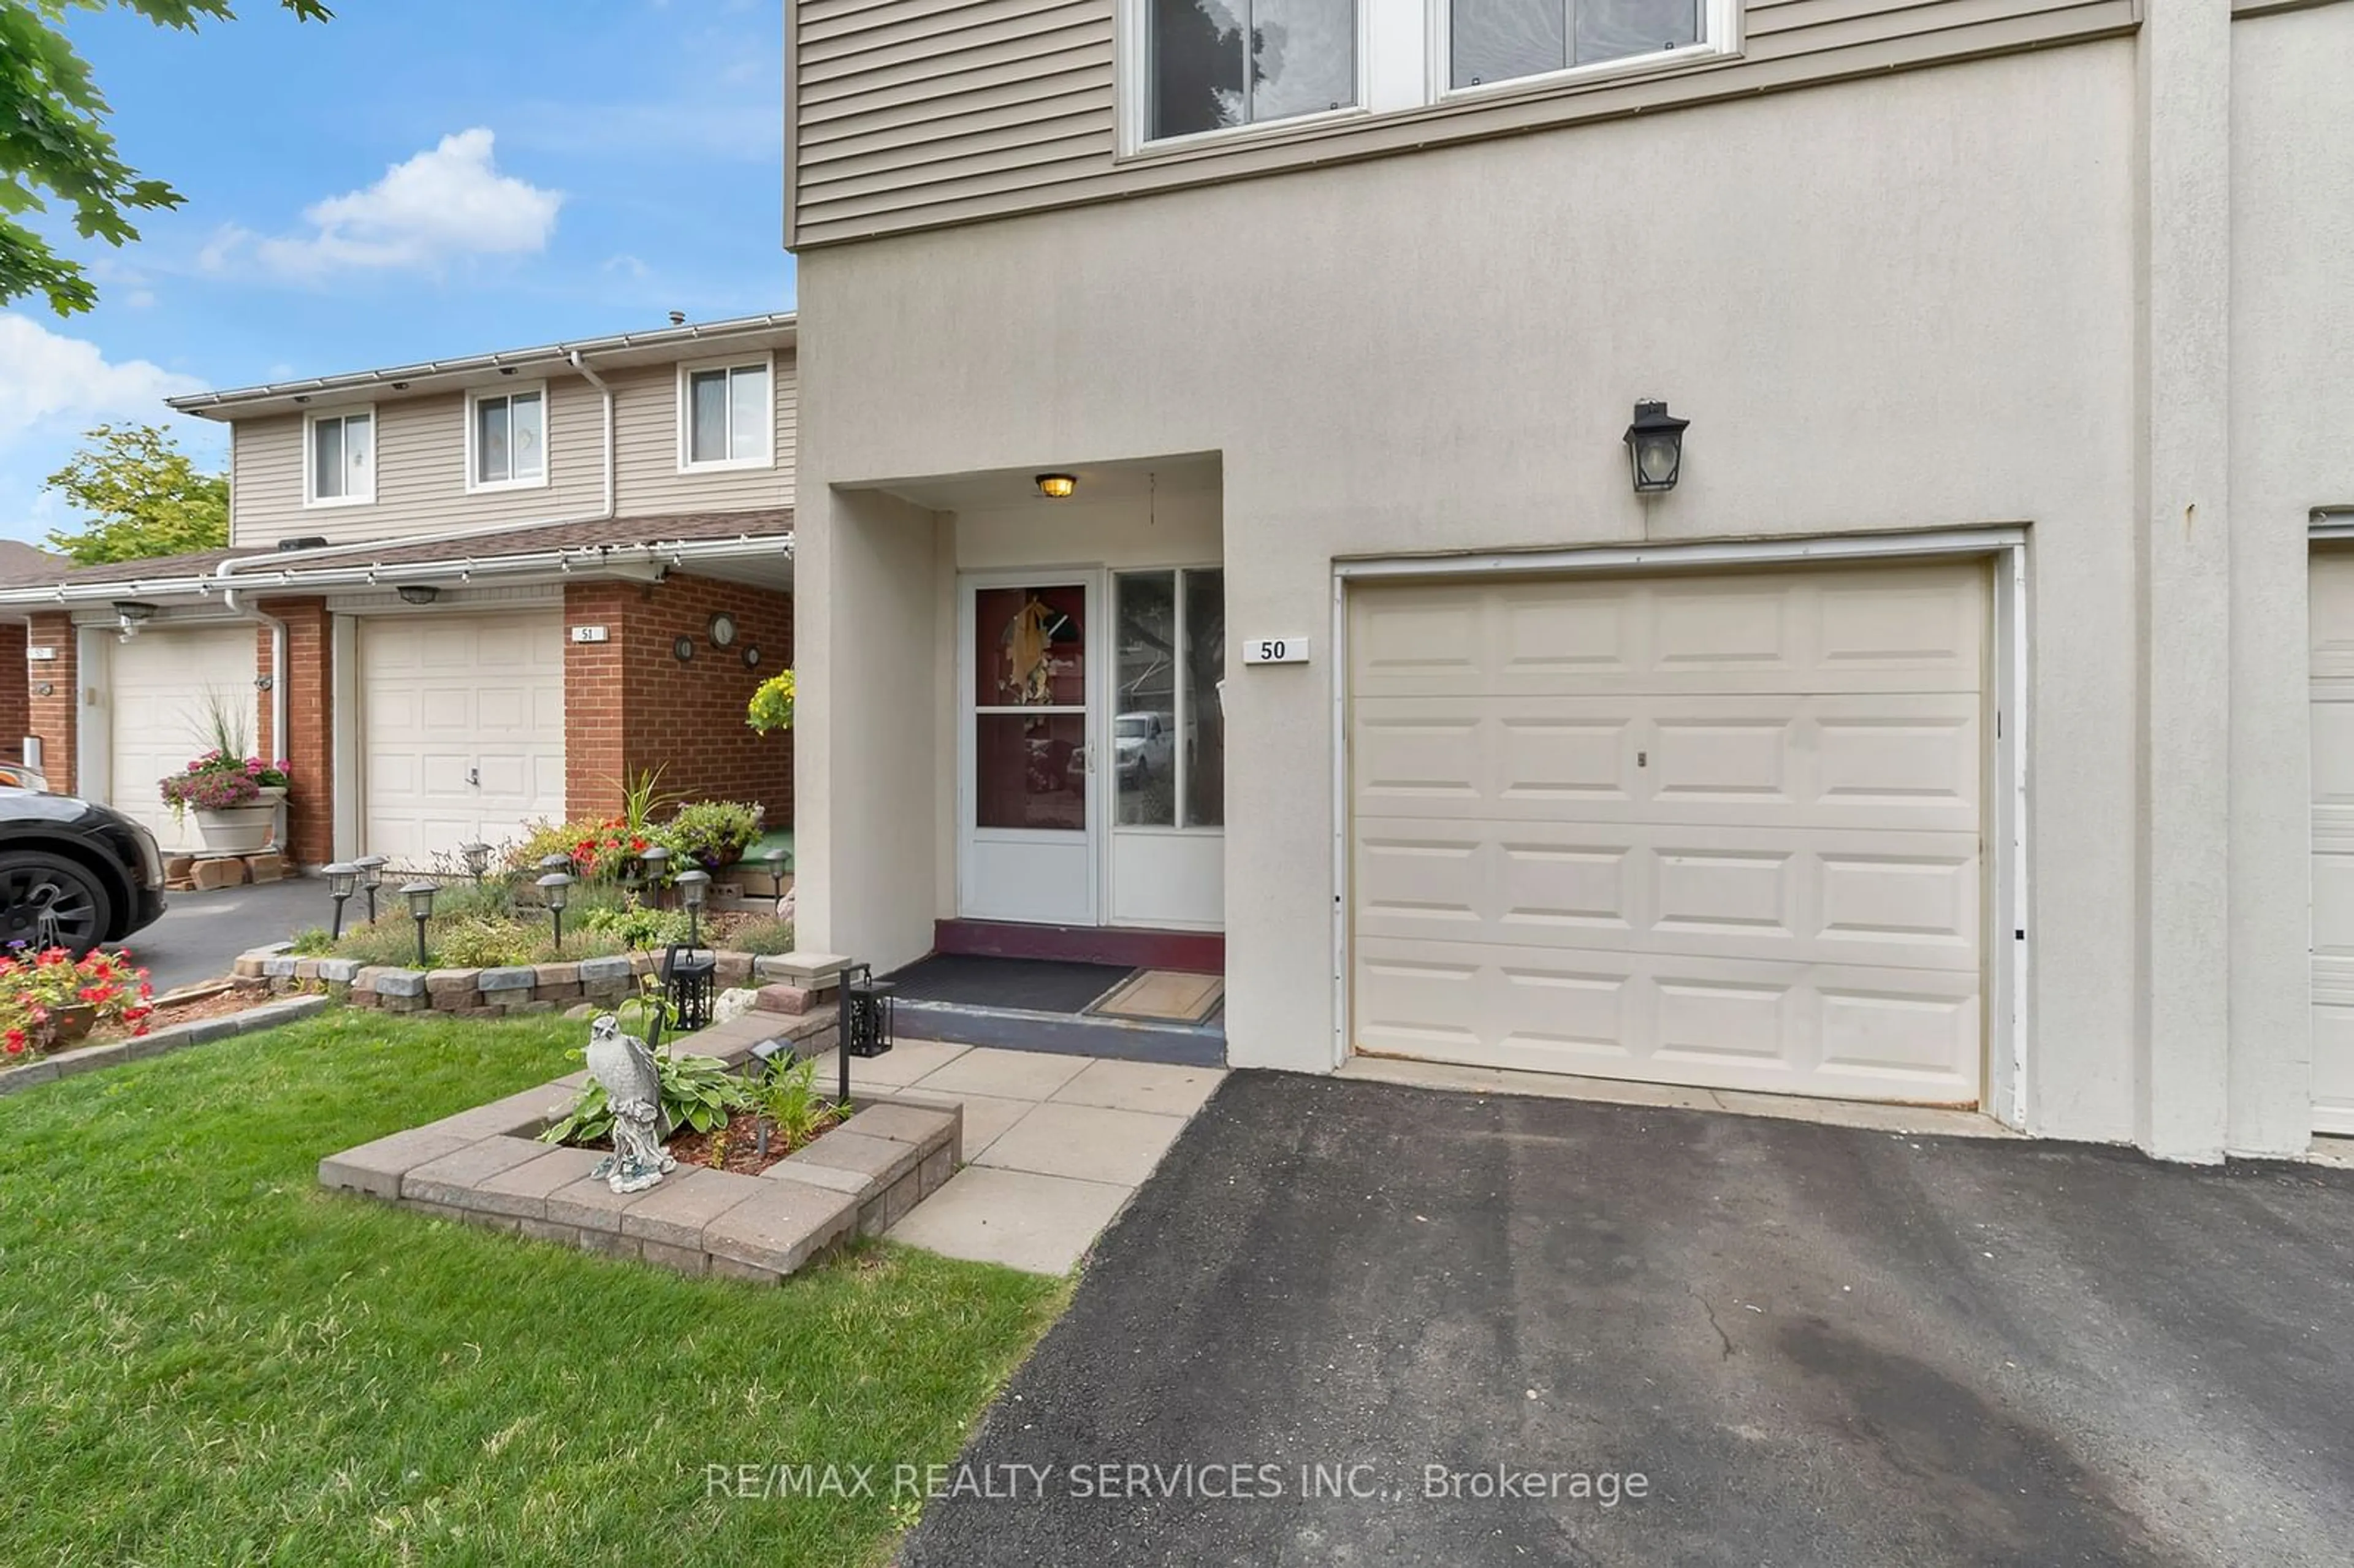 A pic from exterior of the house or condo for 50 Carisbrooke Crt #50, Brampton Ontario L6S 3K1